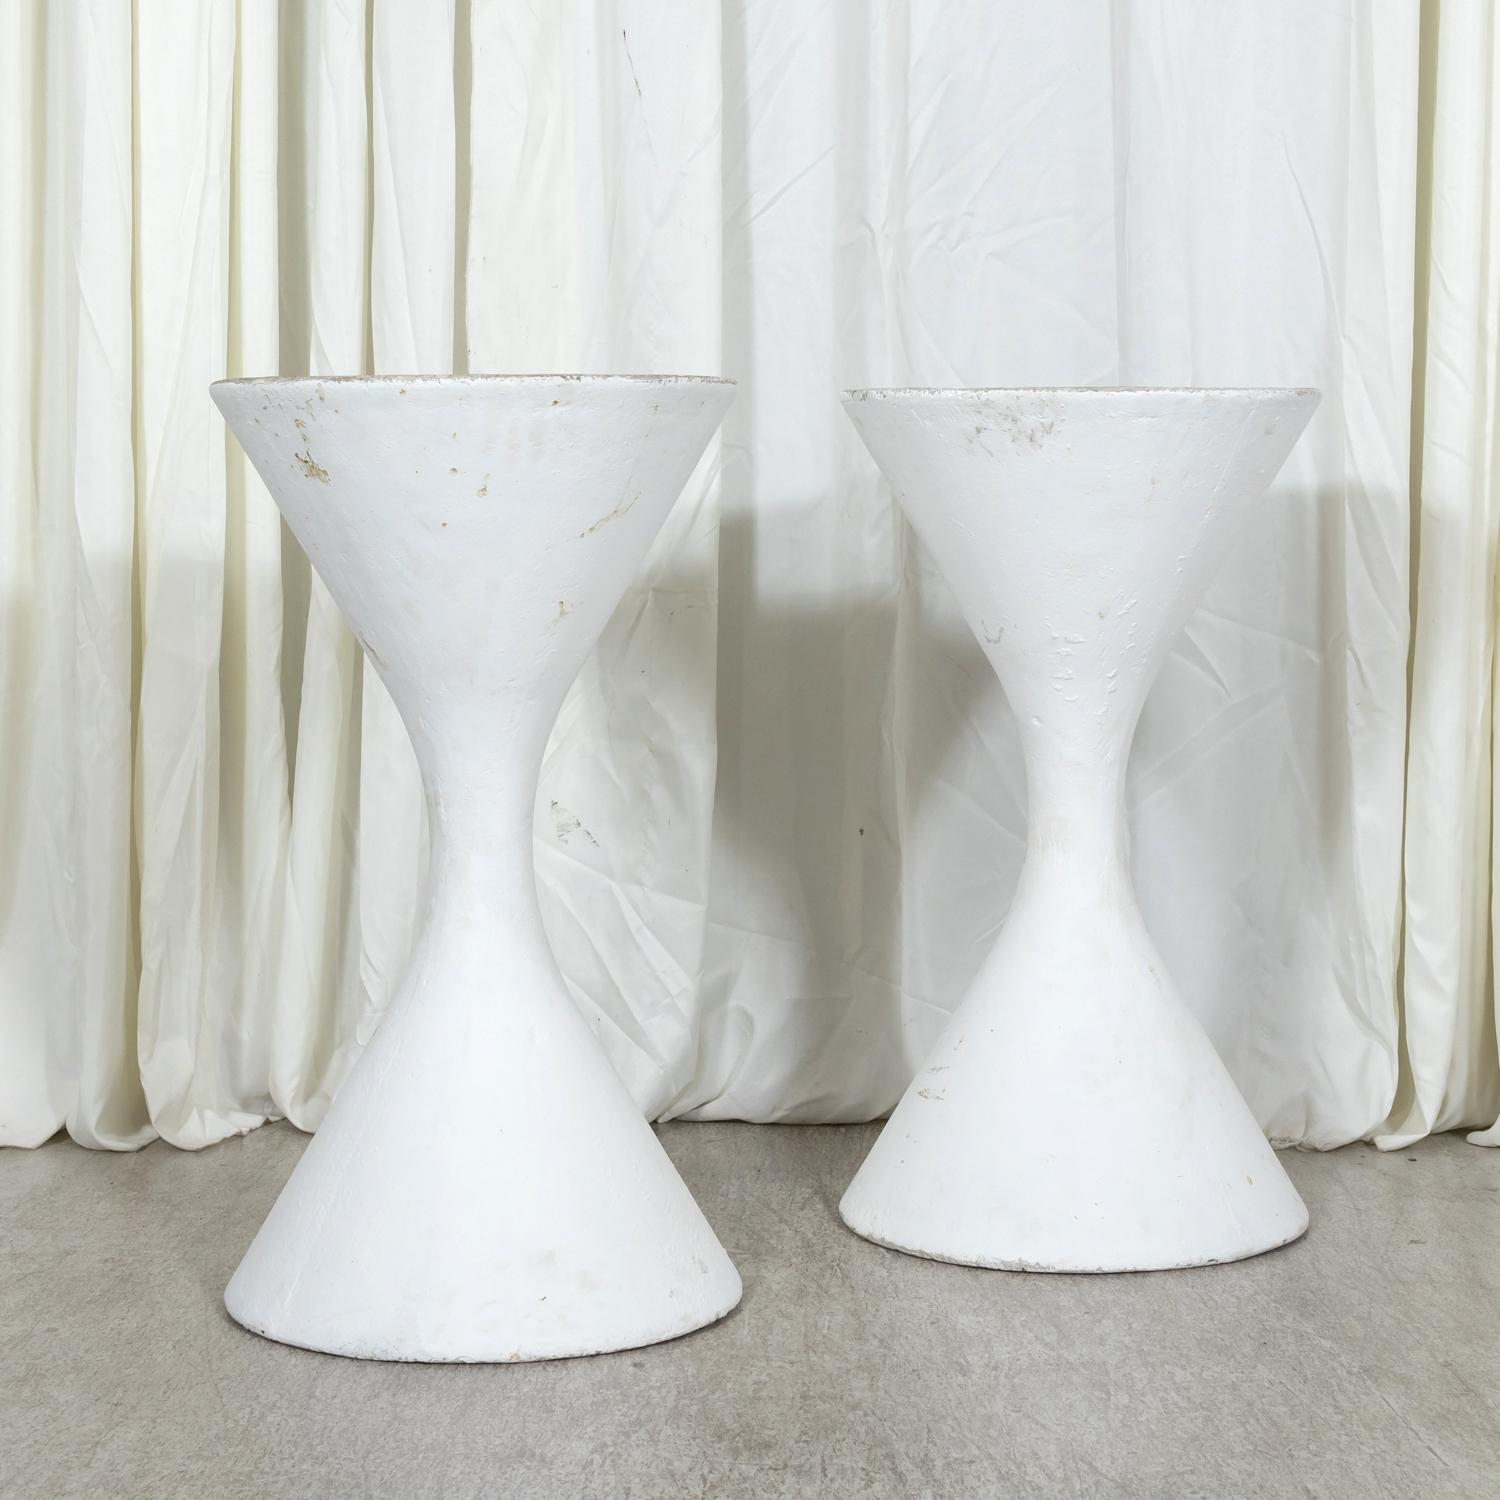  Pair of Mid-Century Modern Willy Guhl X-Large Hourglass Diablo Planters For Sale 6